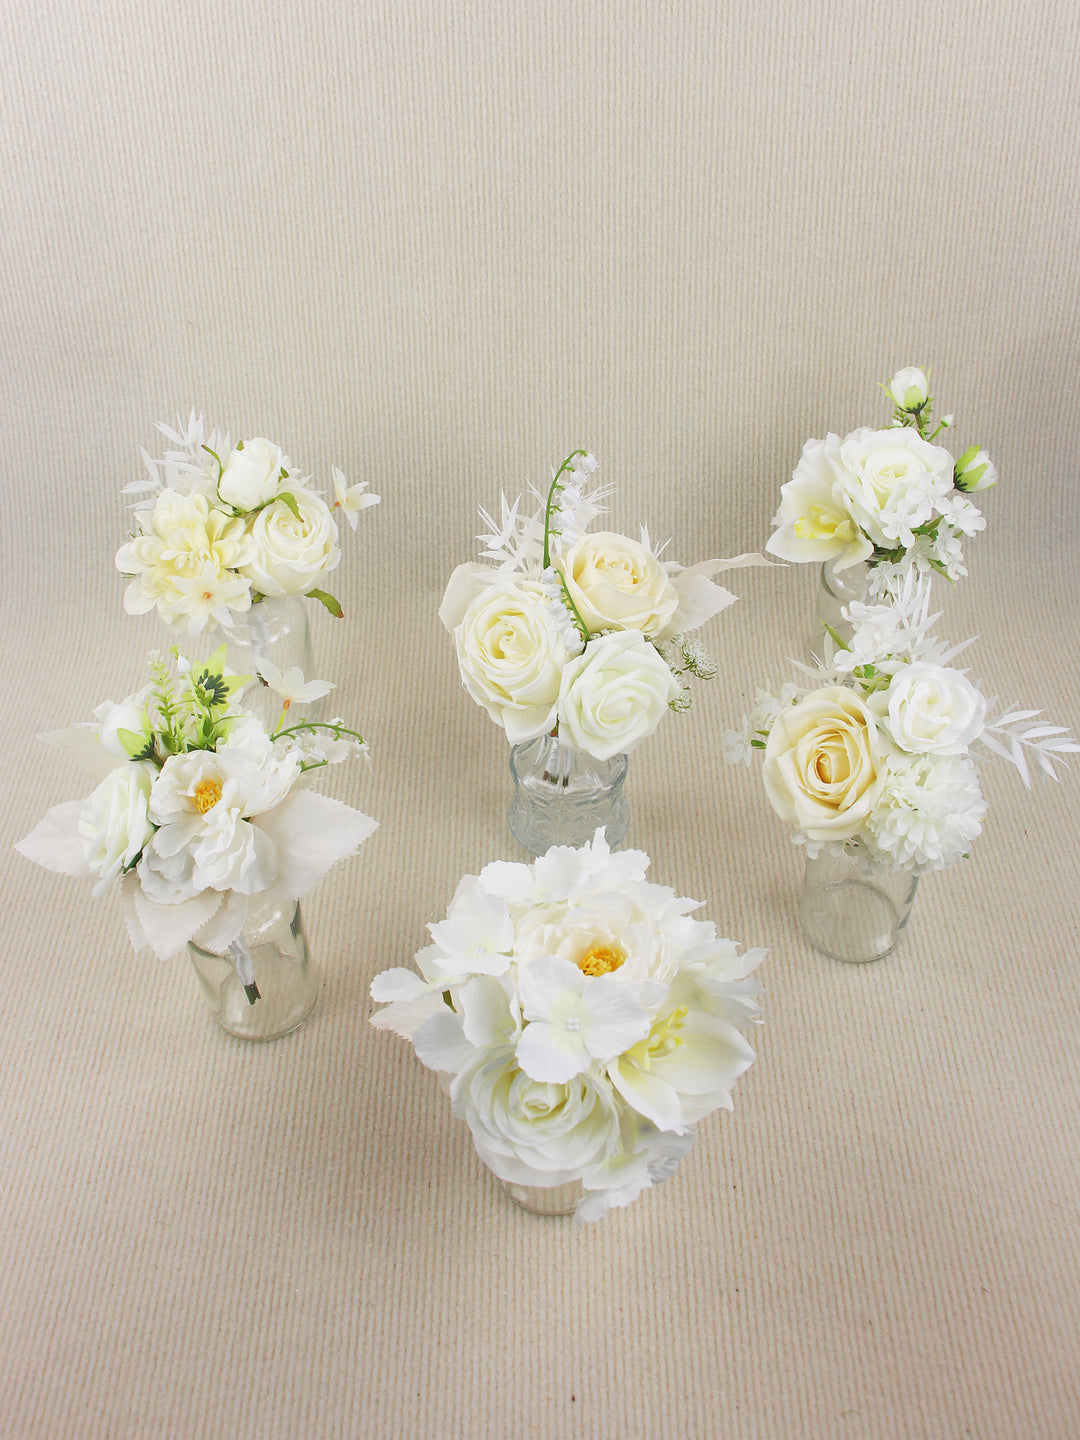 6Pcs Assorted White & Champagne Flower Centerpieces